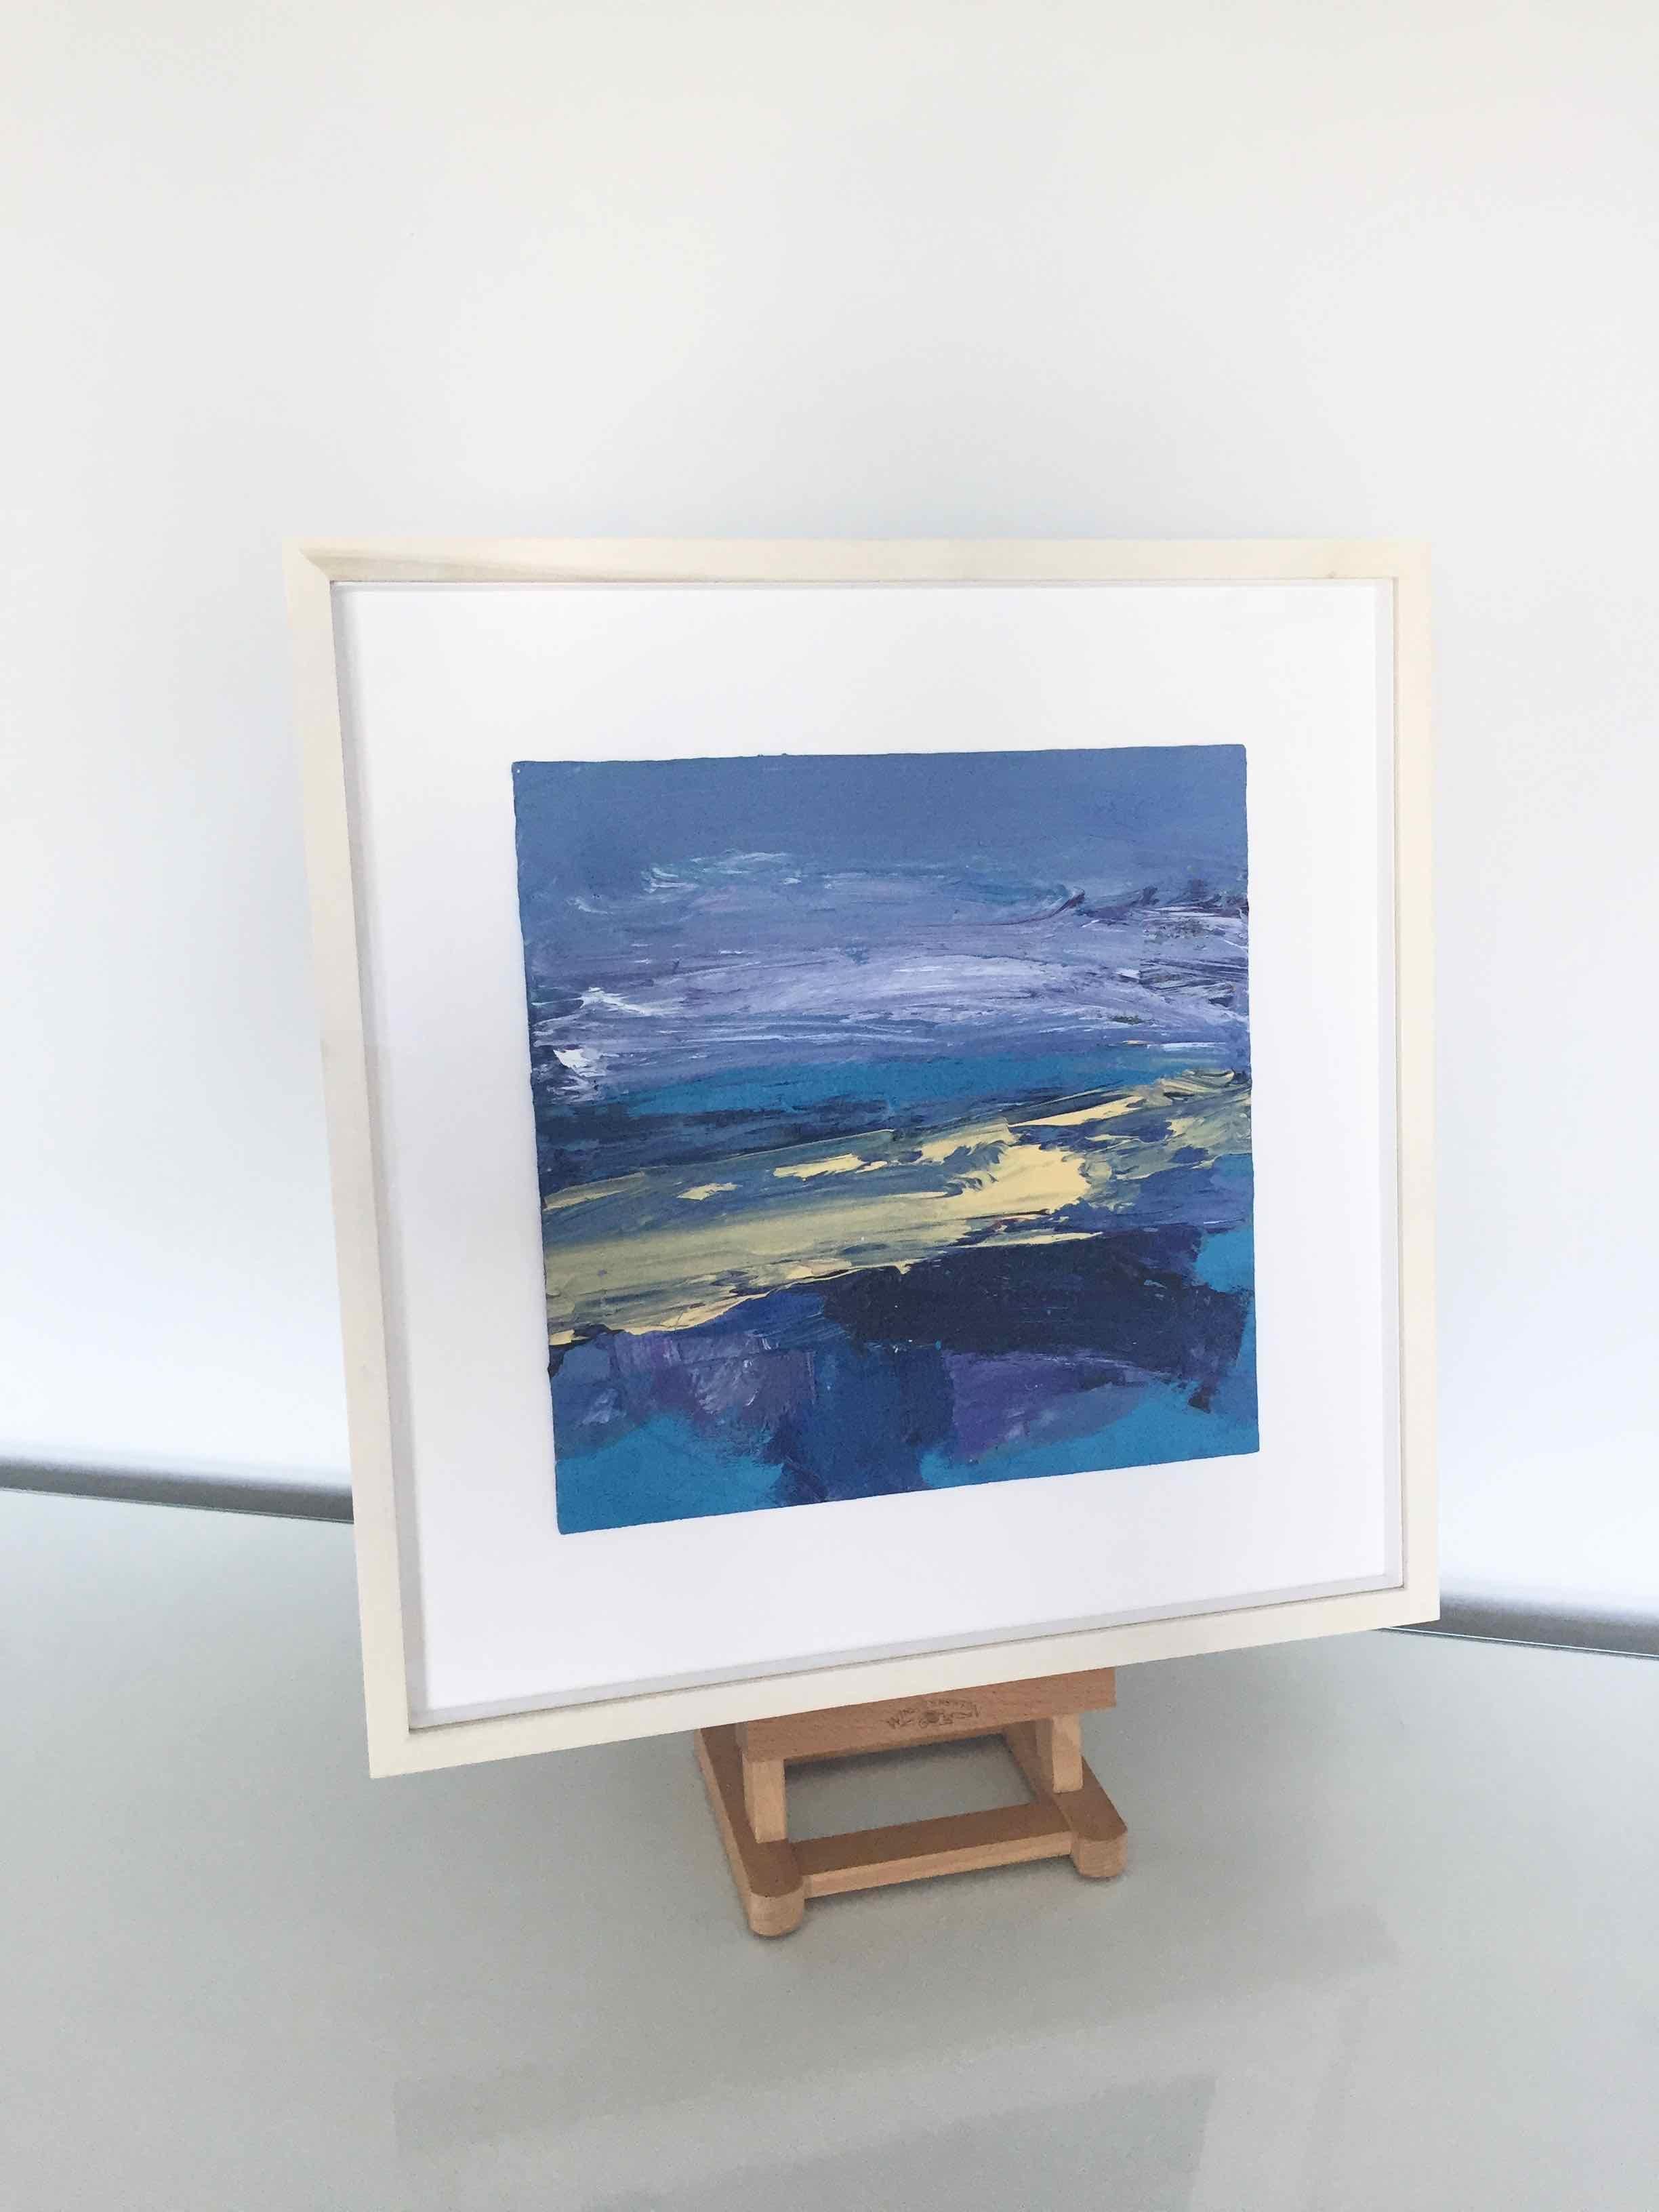 Southsands, 2017, Acrylic on board, float-mounted and framed behind UV and low-reflective glass, 18 1/10 × 18 1/10 in; 46 × 46 cm, by Deborah Lanyon

This is one of Deborah’s smaller, but still vibrant and energetic works on board.  Since her first